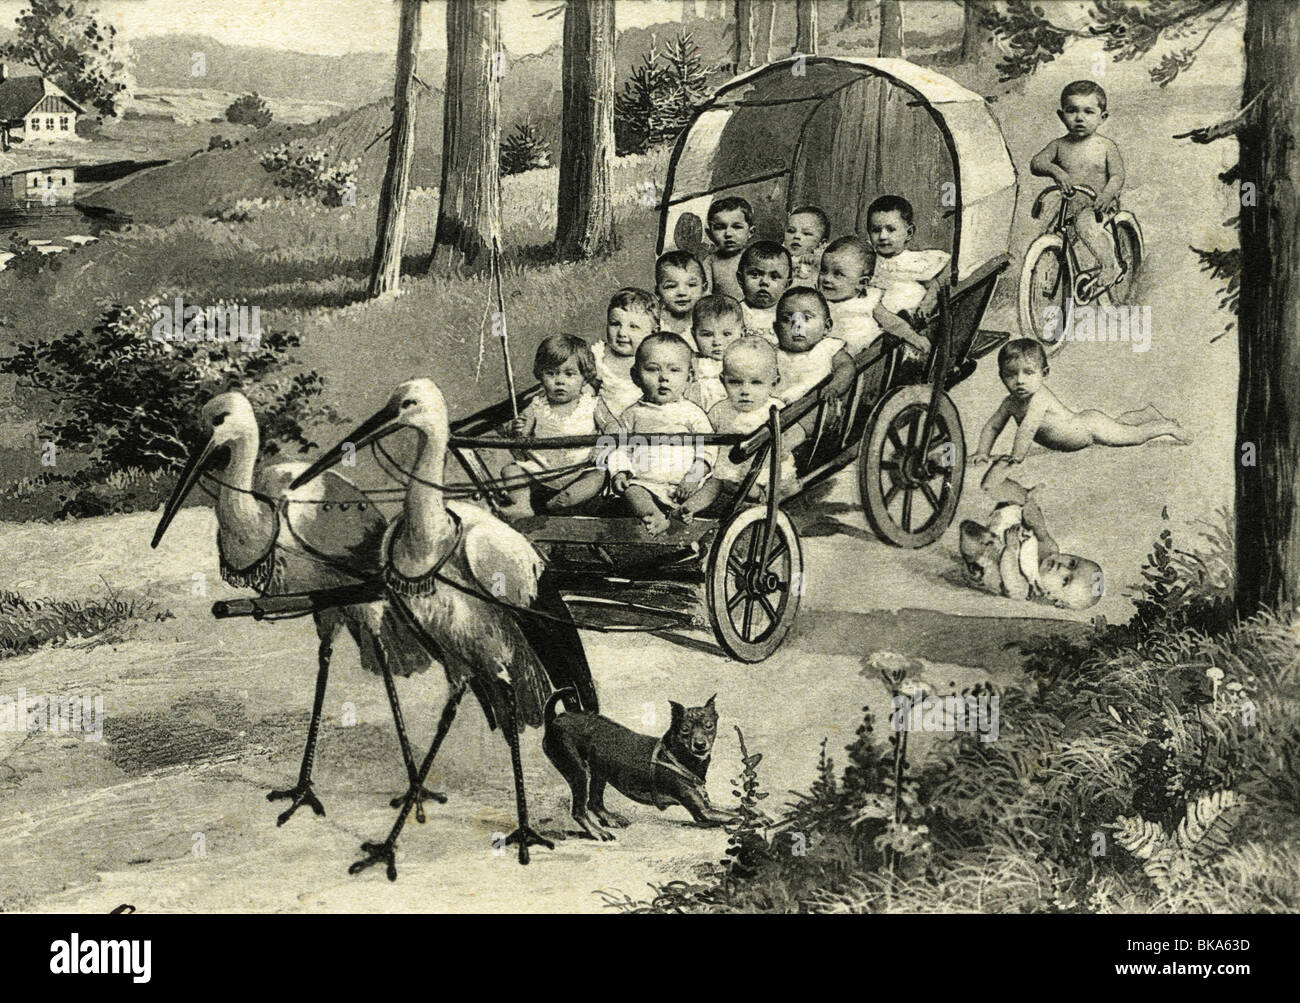 kitsch / souvenir, stork bringing children, drawing collage with photography, Germany, 1902, Stock Photo